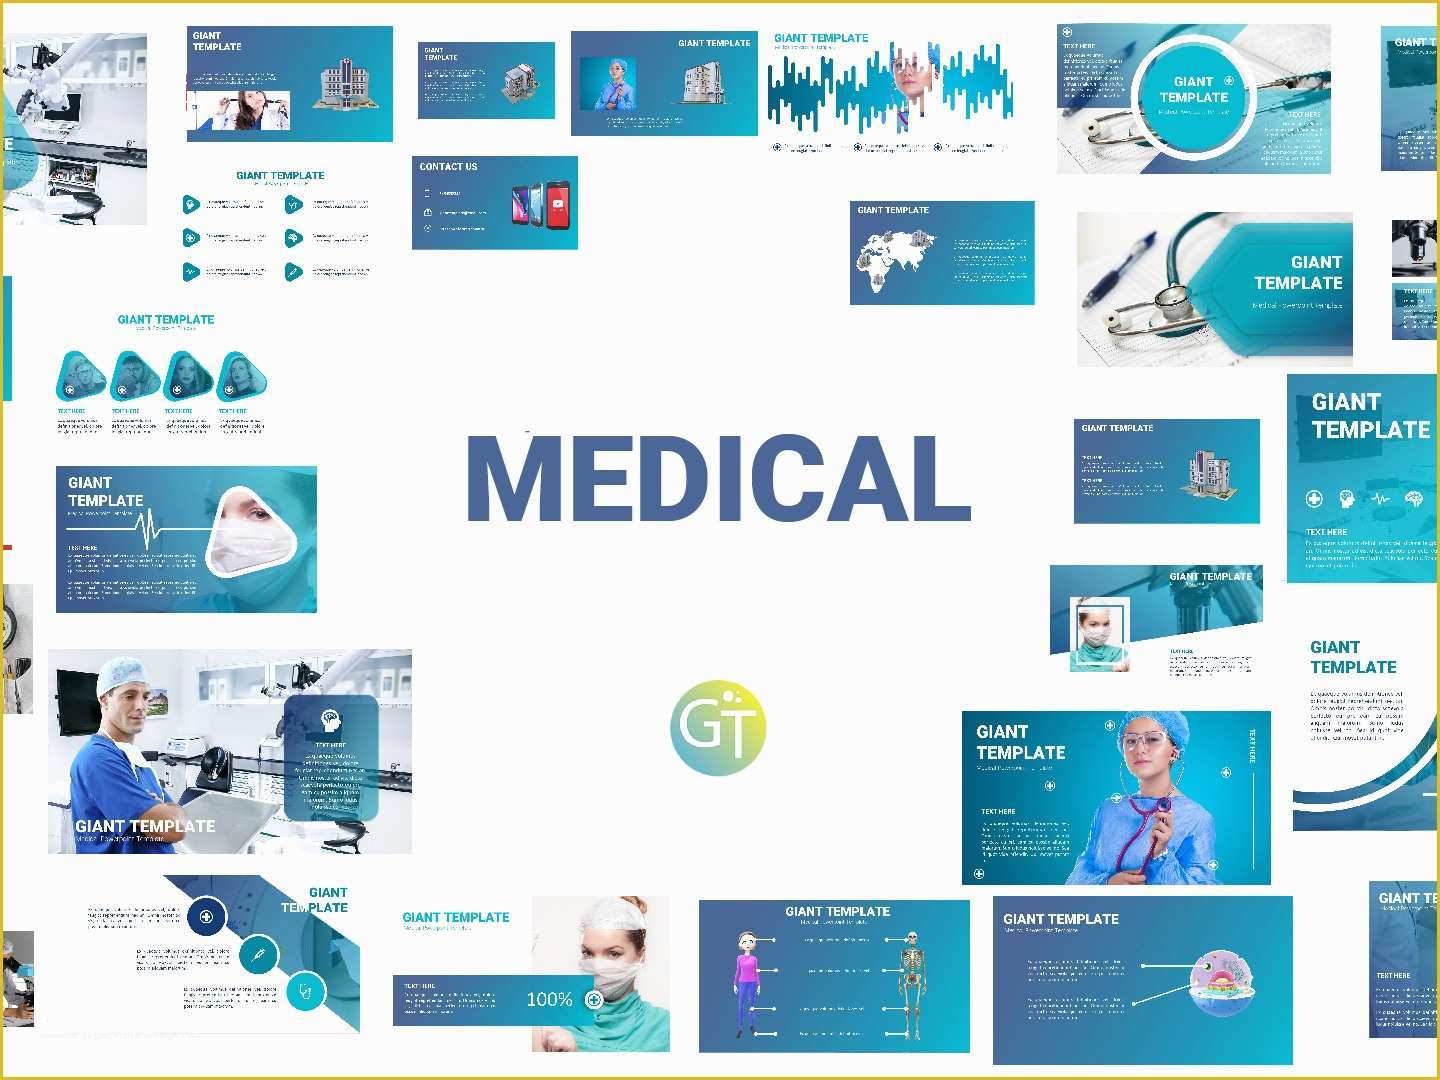 Free Healthcare Powerpoint Templates Of Medical Powerpoint Templates Free Download by Giant